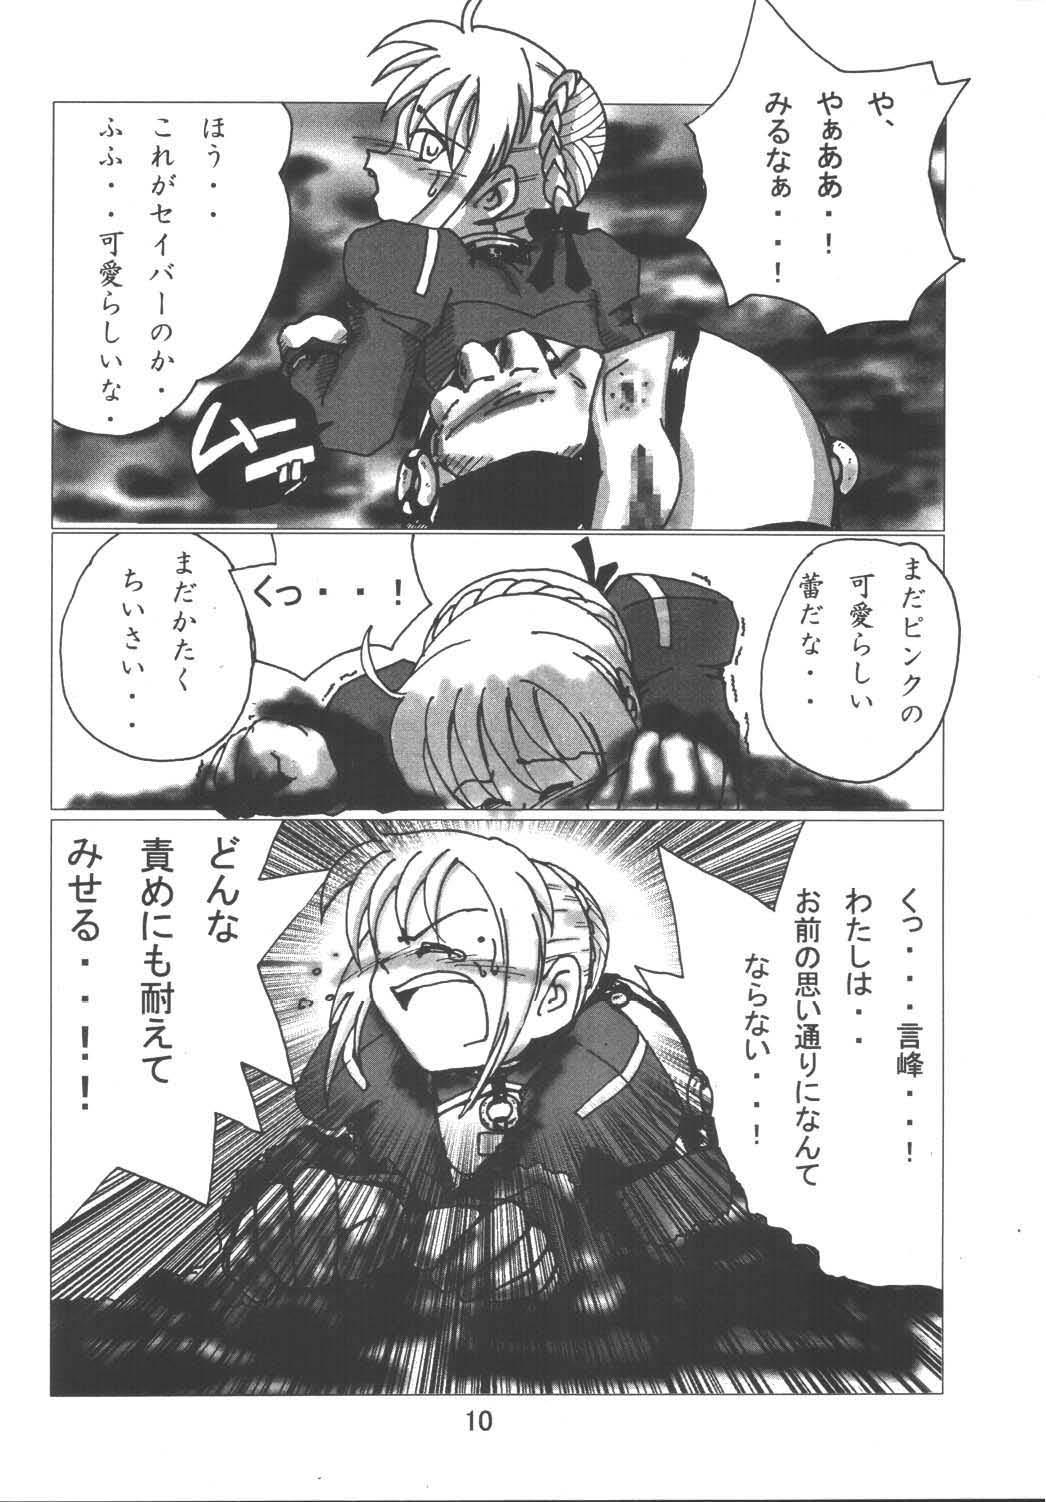 Arrecha Fate Nightmare For Saber - Fate stay night European Porn - Page 10